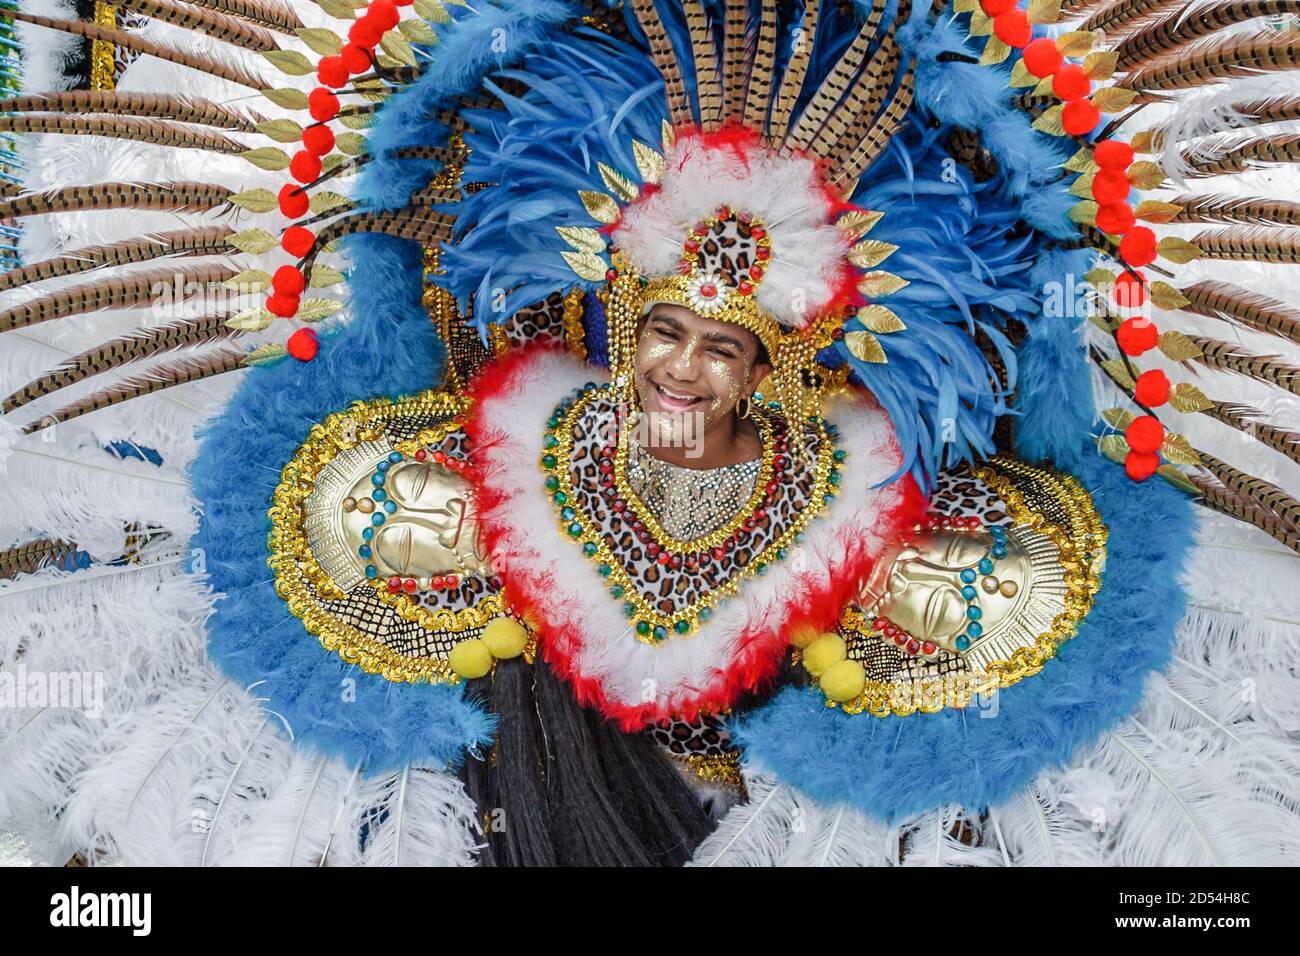 Florida Ft. Fort Lauderdale Caribbean Mardi Gras Junior Carnival,hand crafted handmade costumes costume outfit outfits,parade procession Black African Stock Photo